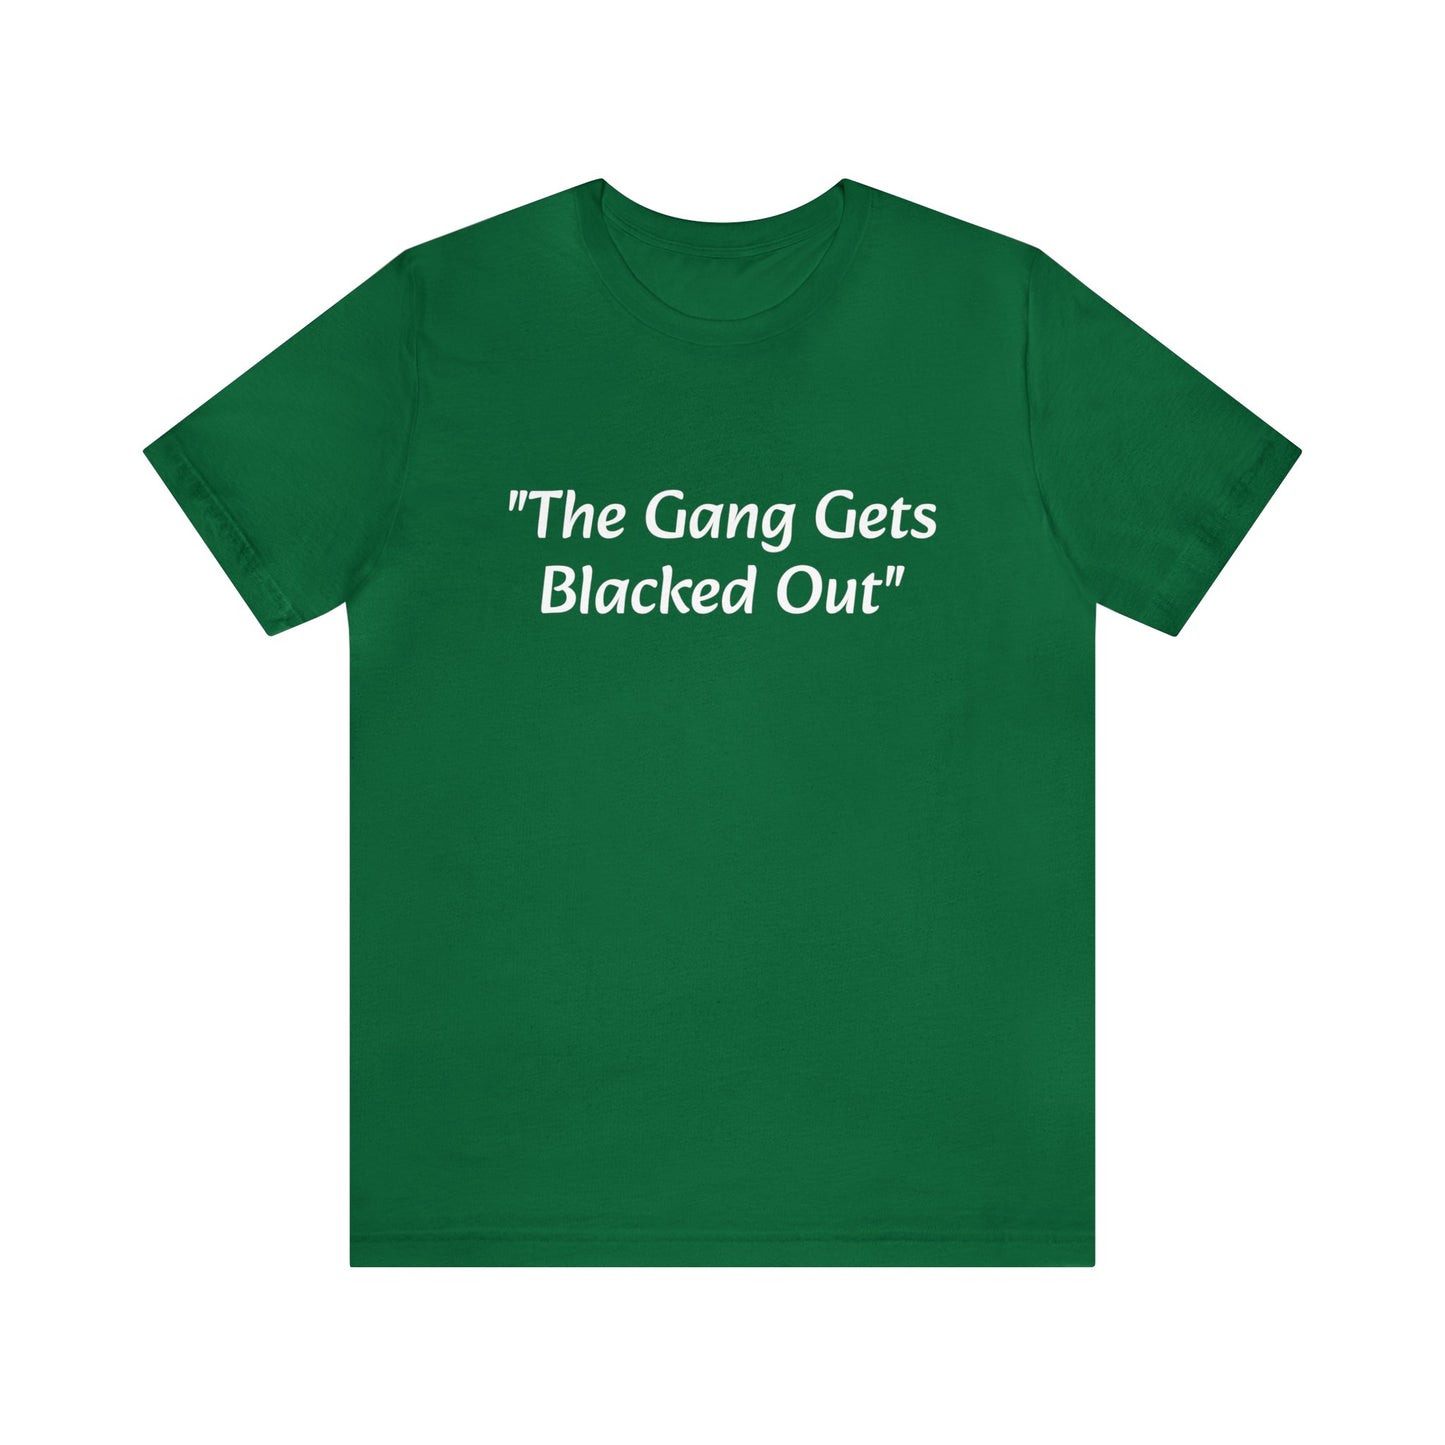 The Gang Gets Blacked Out Men's Tee